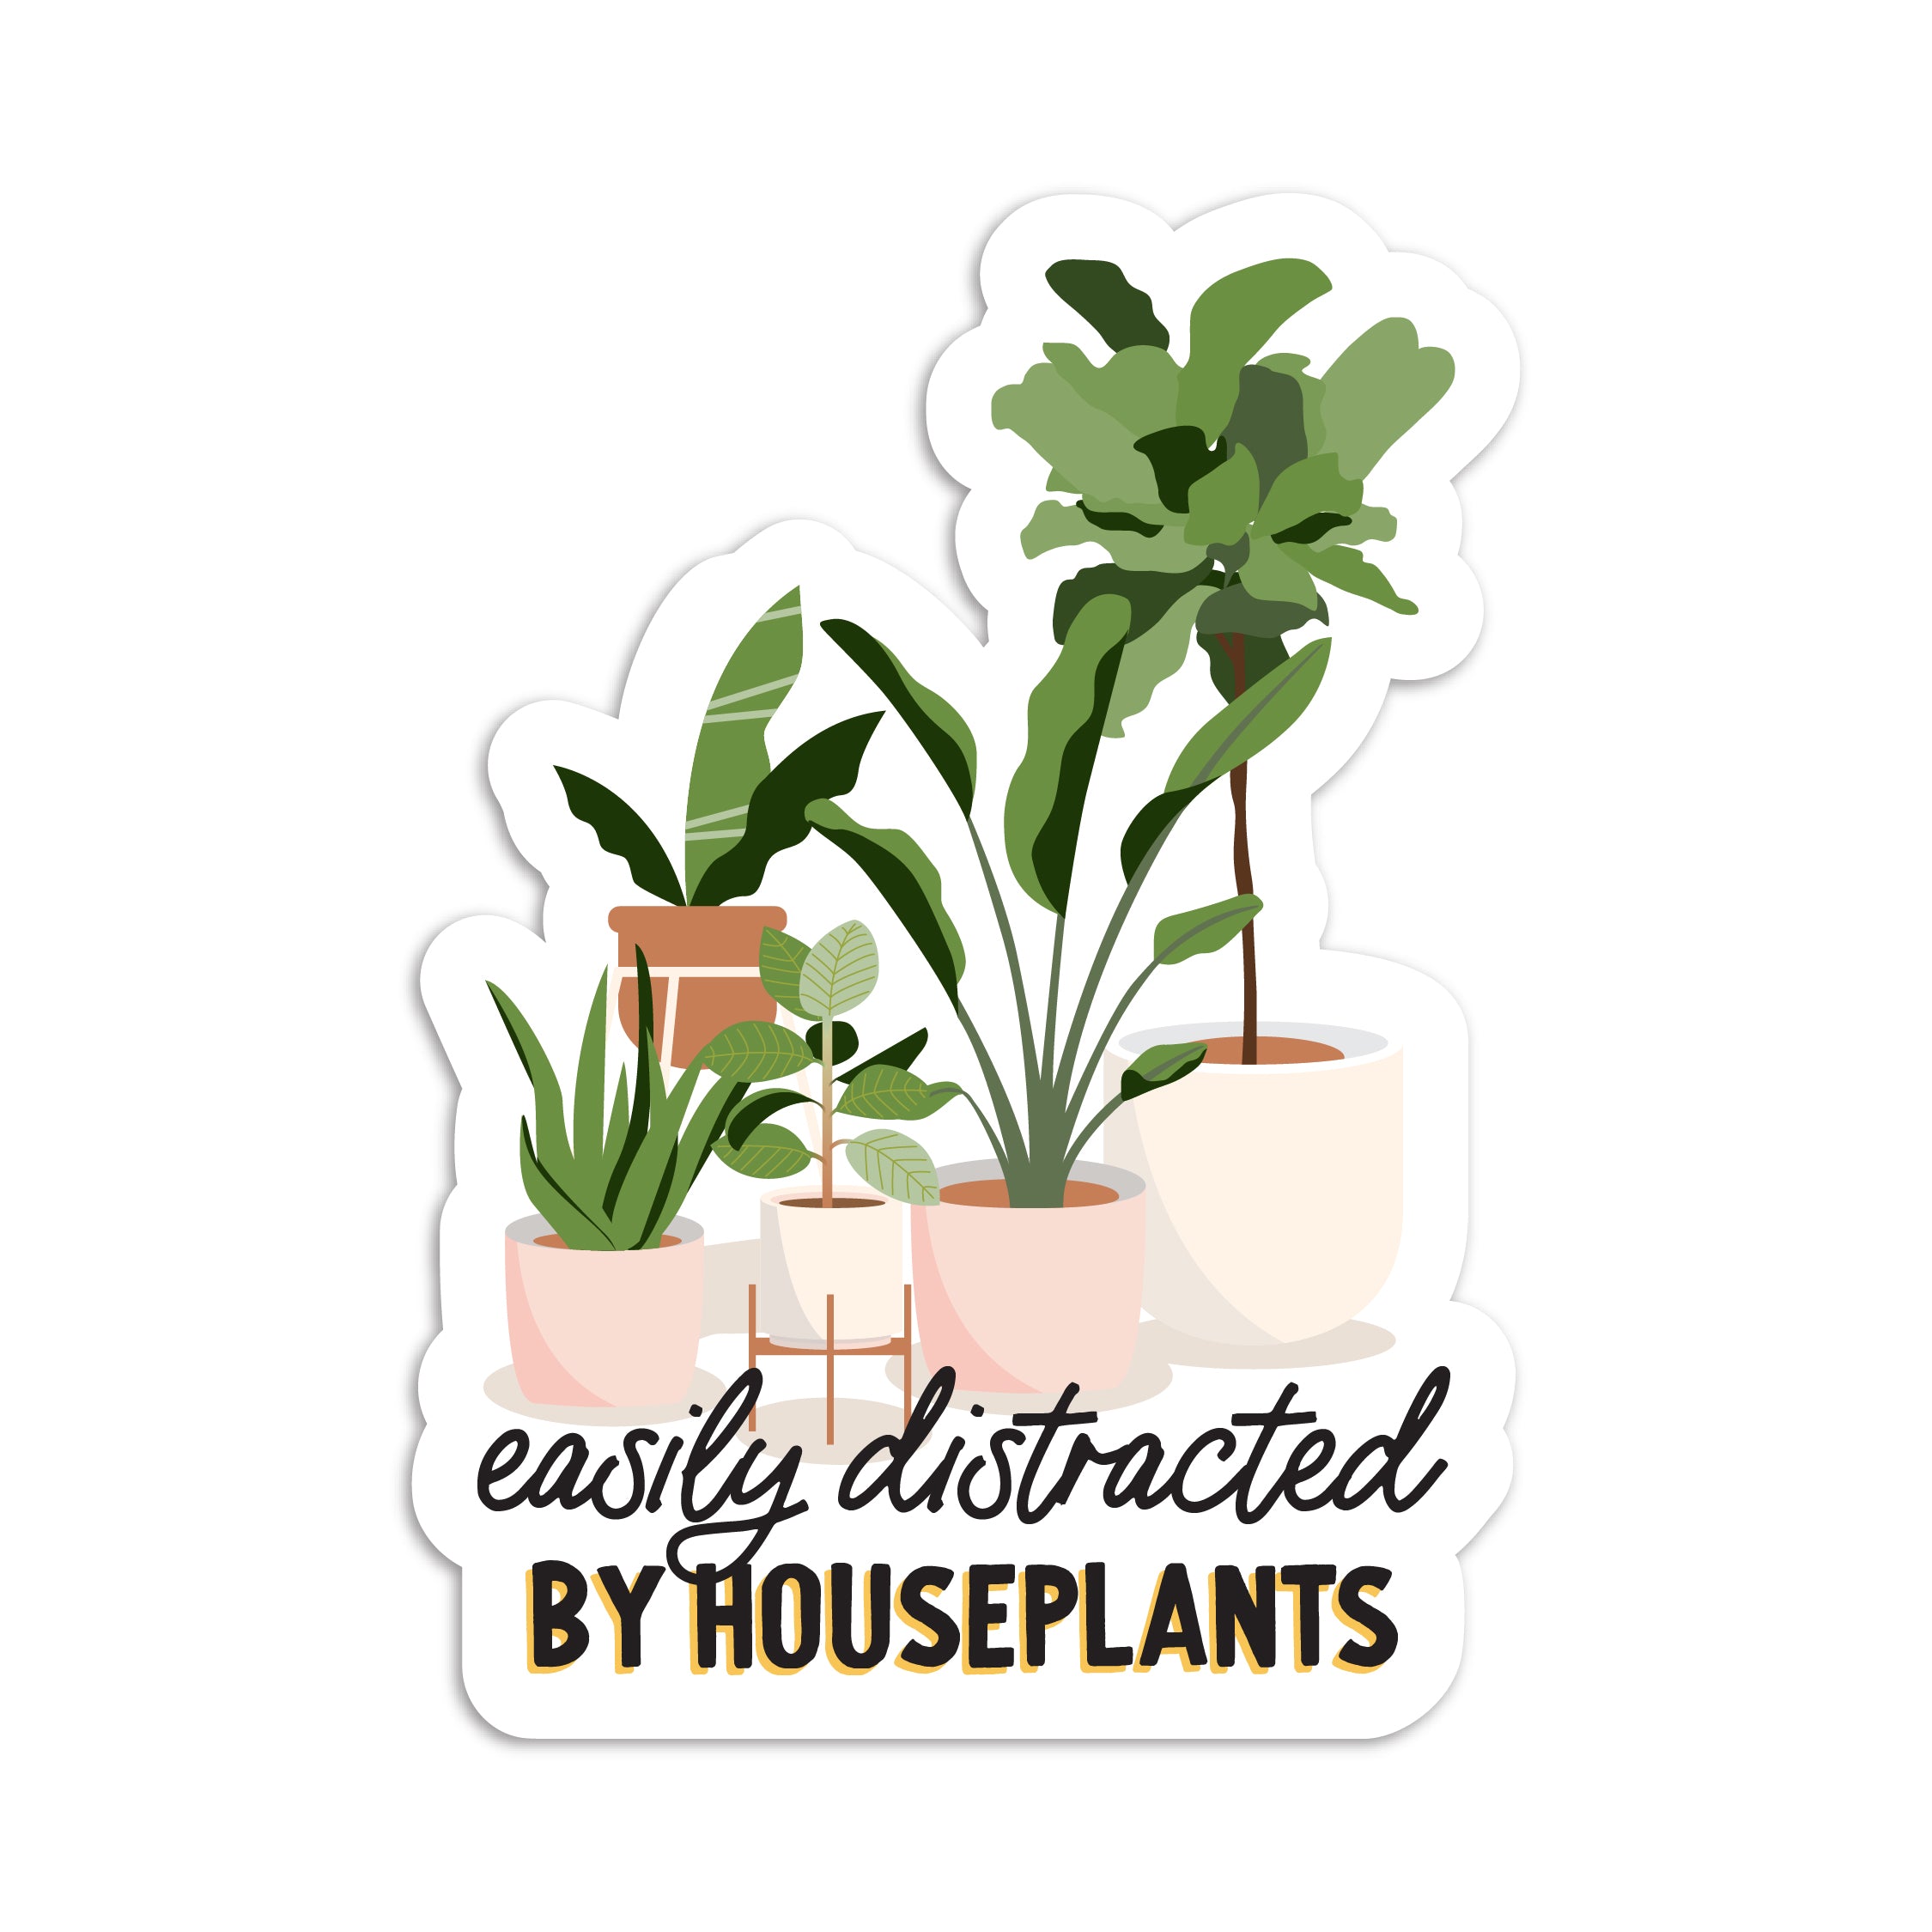 Easily distracted by houseplants vinyl sticker by I&